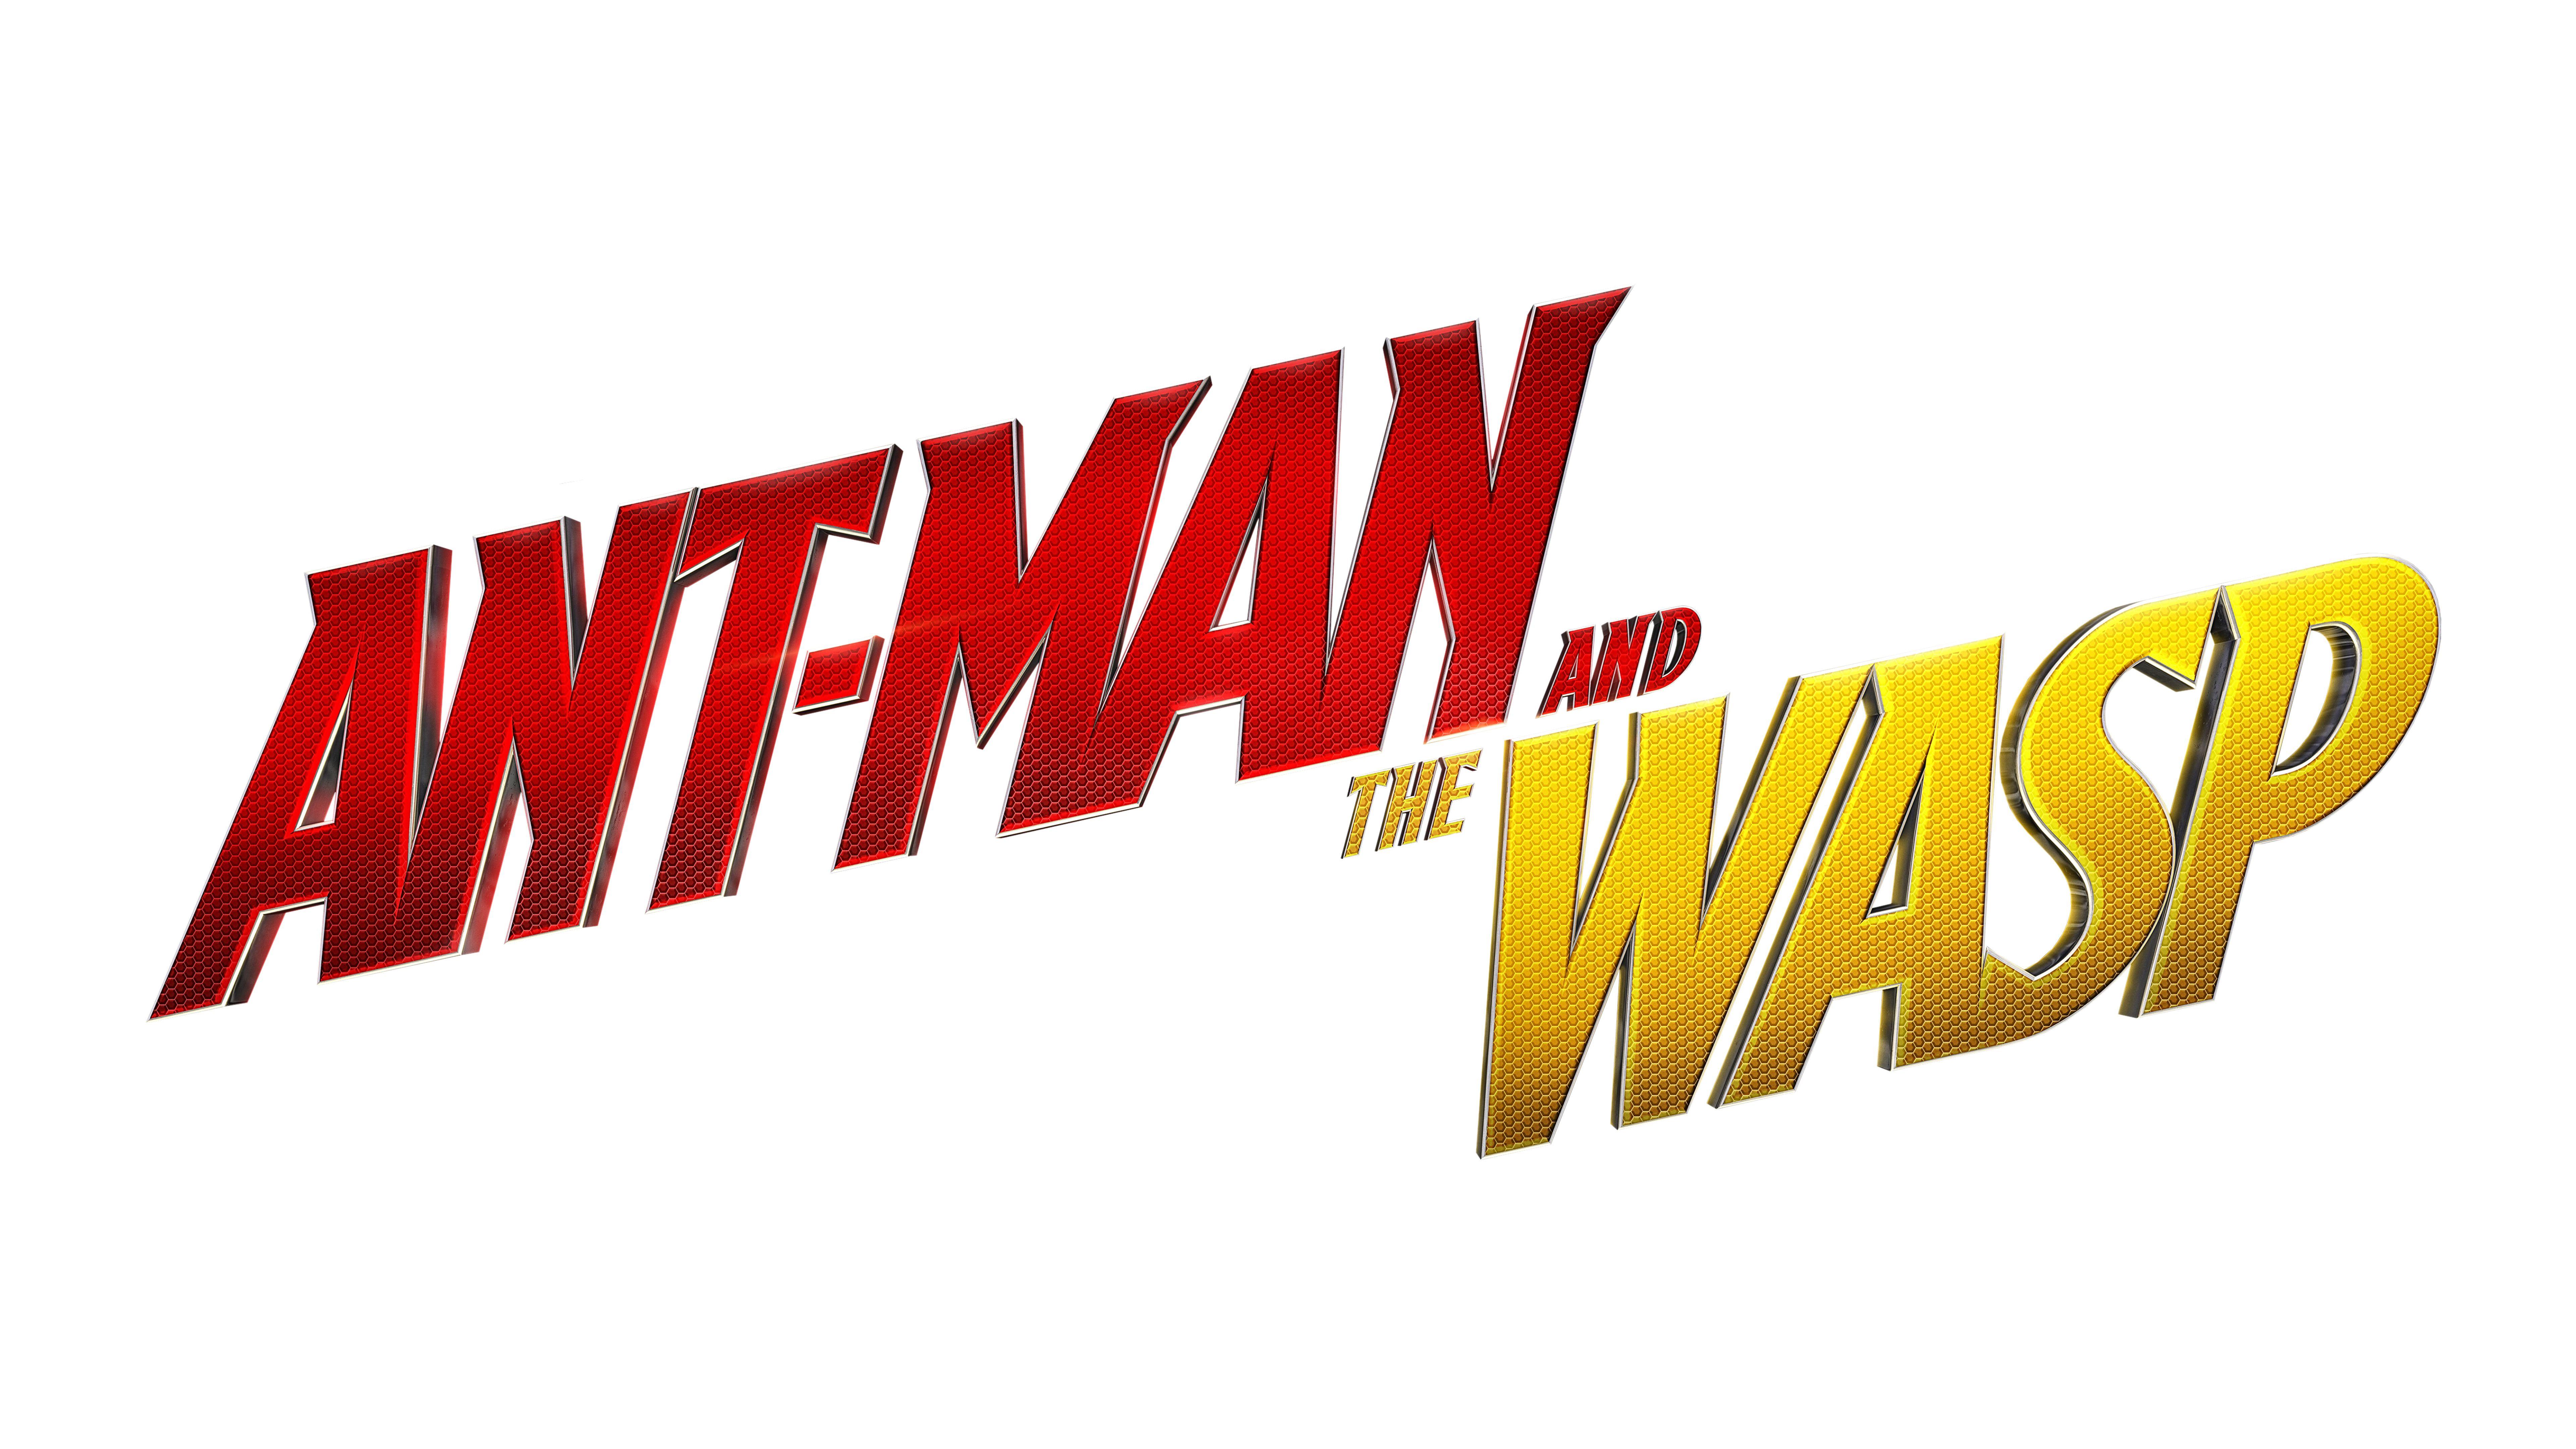 8K Logo - 7680x4320 Ant Man And The Wasp Logo 8k 8k HD 4k Wallpapers, Images ...